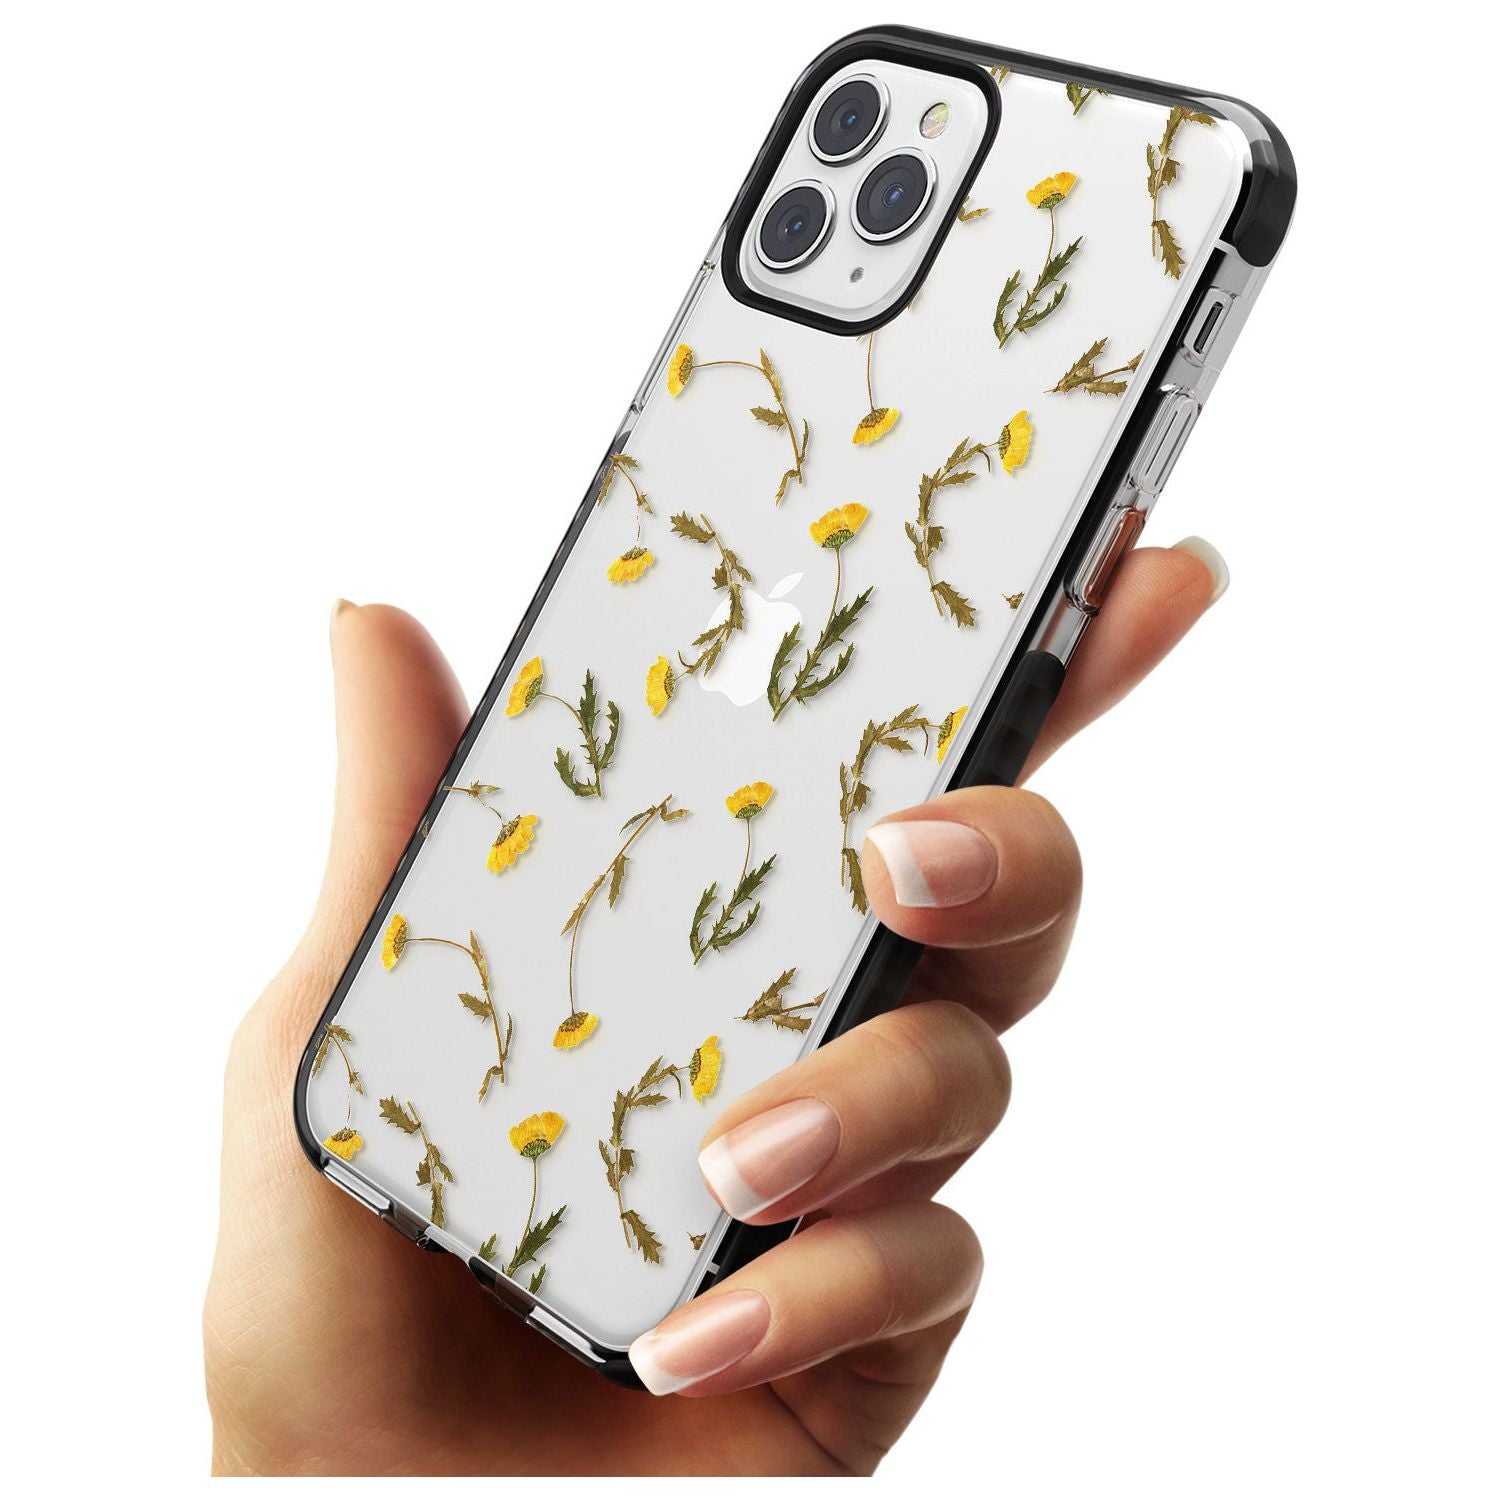 Long Stemmed Wildflowers - Dried Flower-Inspired Black Impact Phone Case for iPhone 11 Pro Max